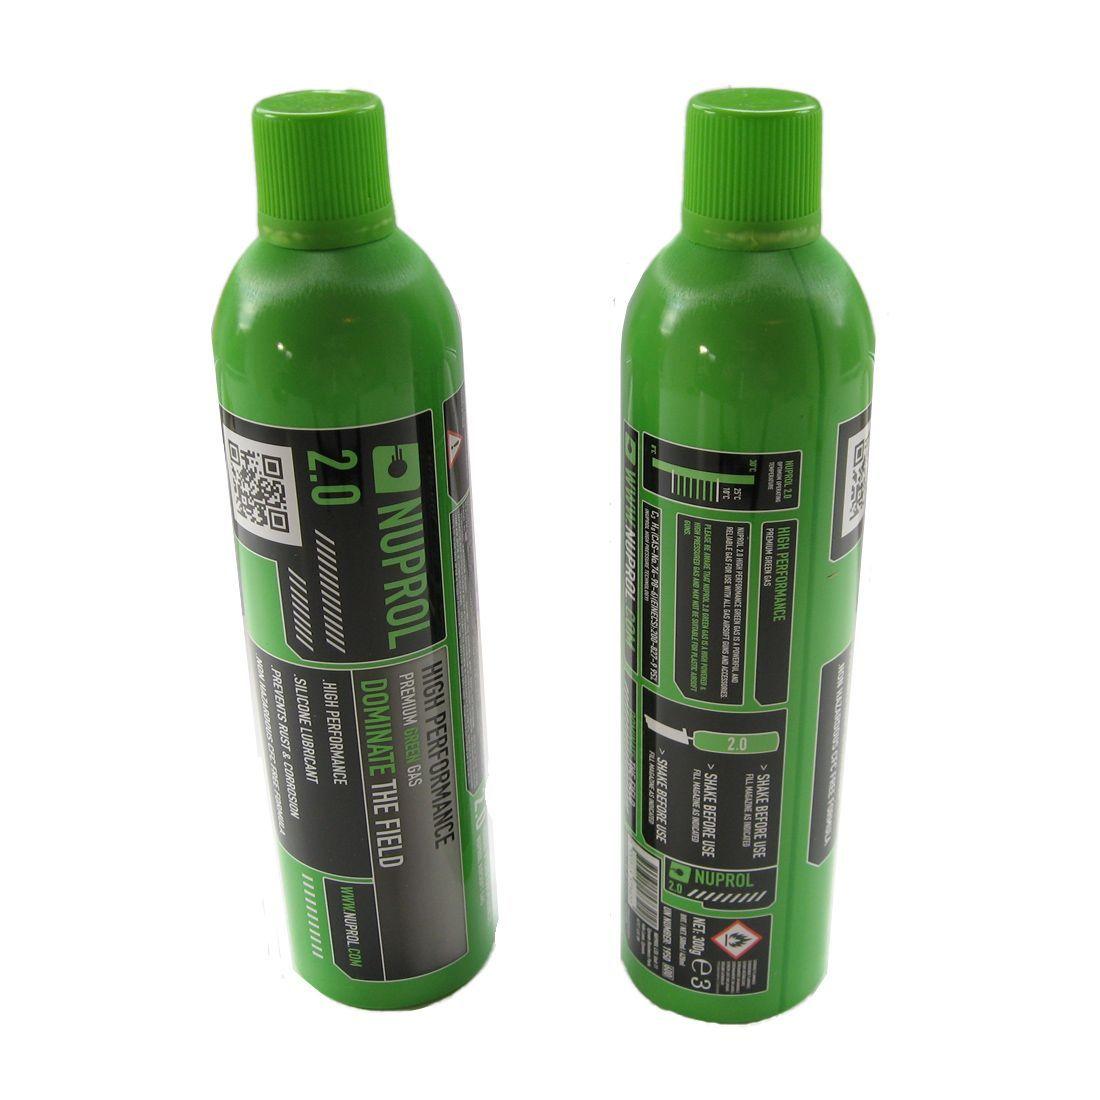 Red and Green Gas Logo - 2 Canisters Of Nuprol 2.0 Premium Green Gas for GBB Airsoft Guns ...